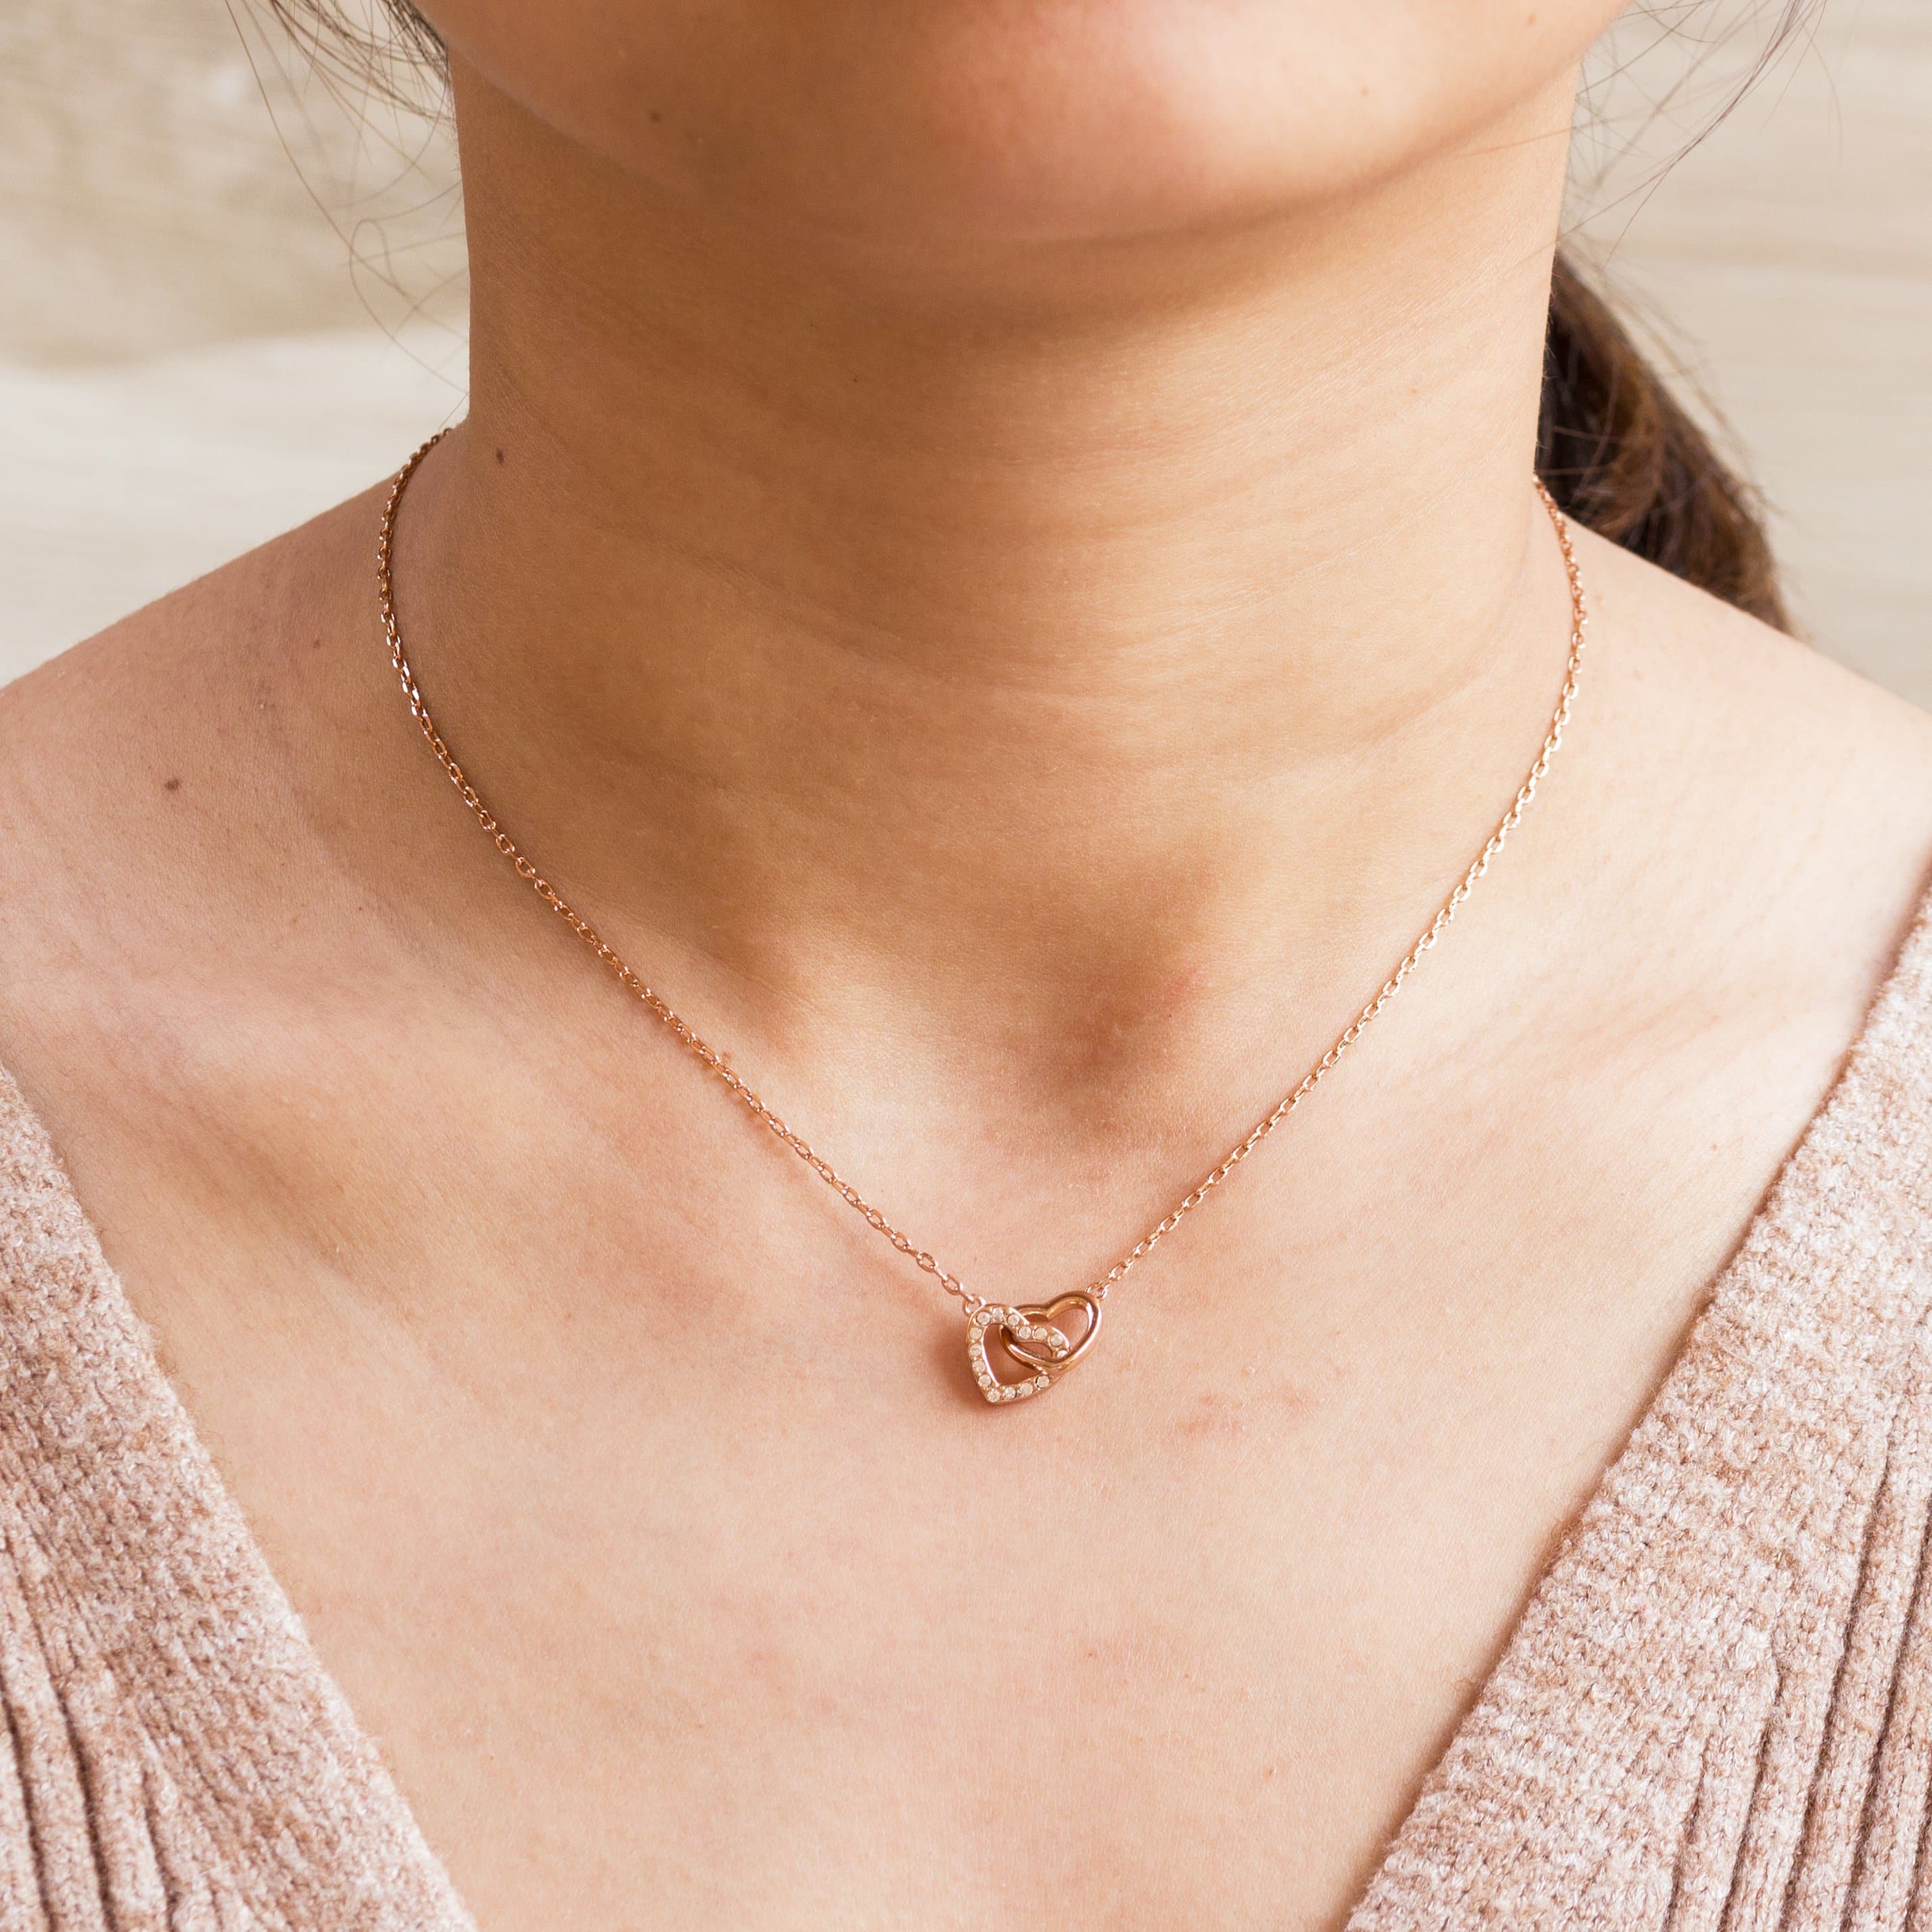 Rose Gold Plated Heart Link Necklace Created with Zircondia® Crystals